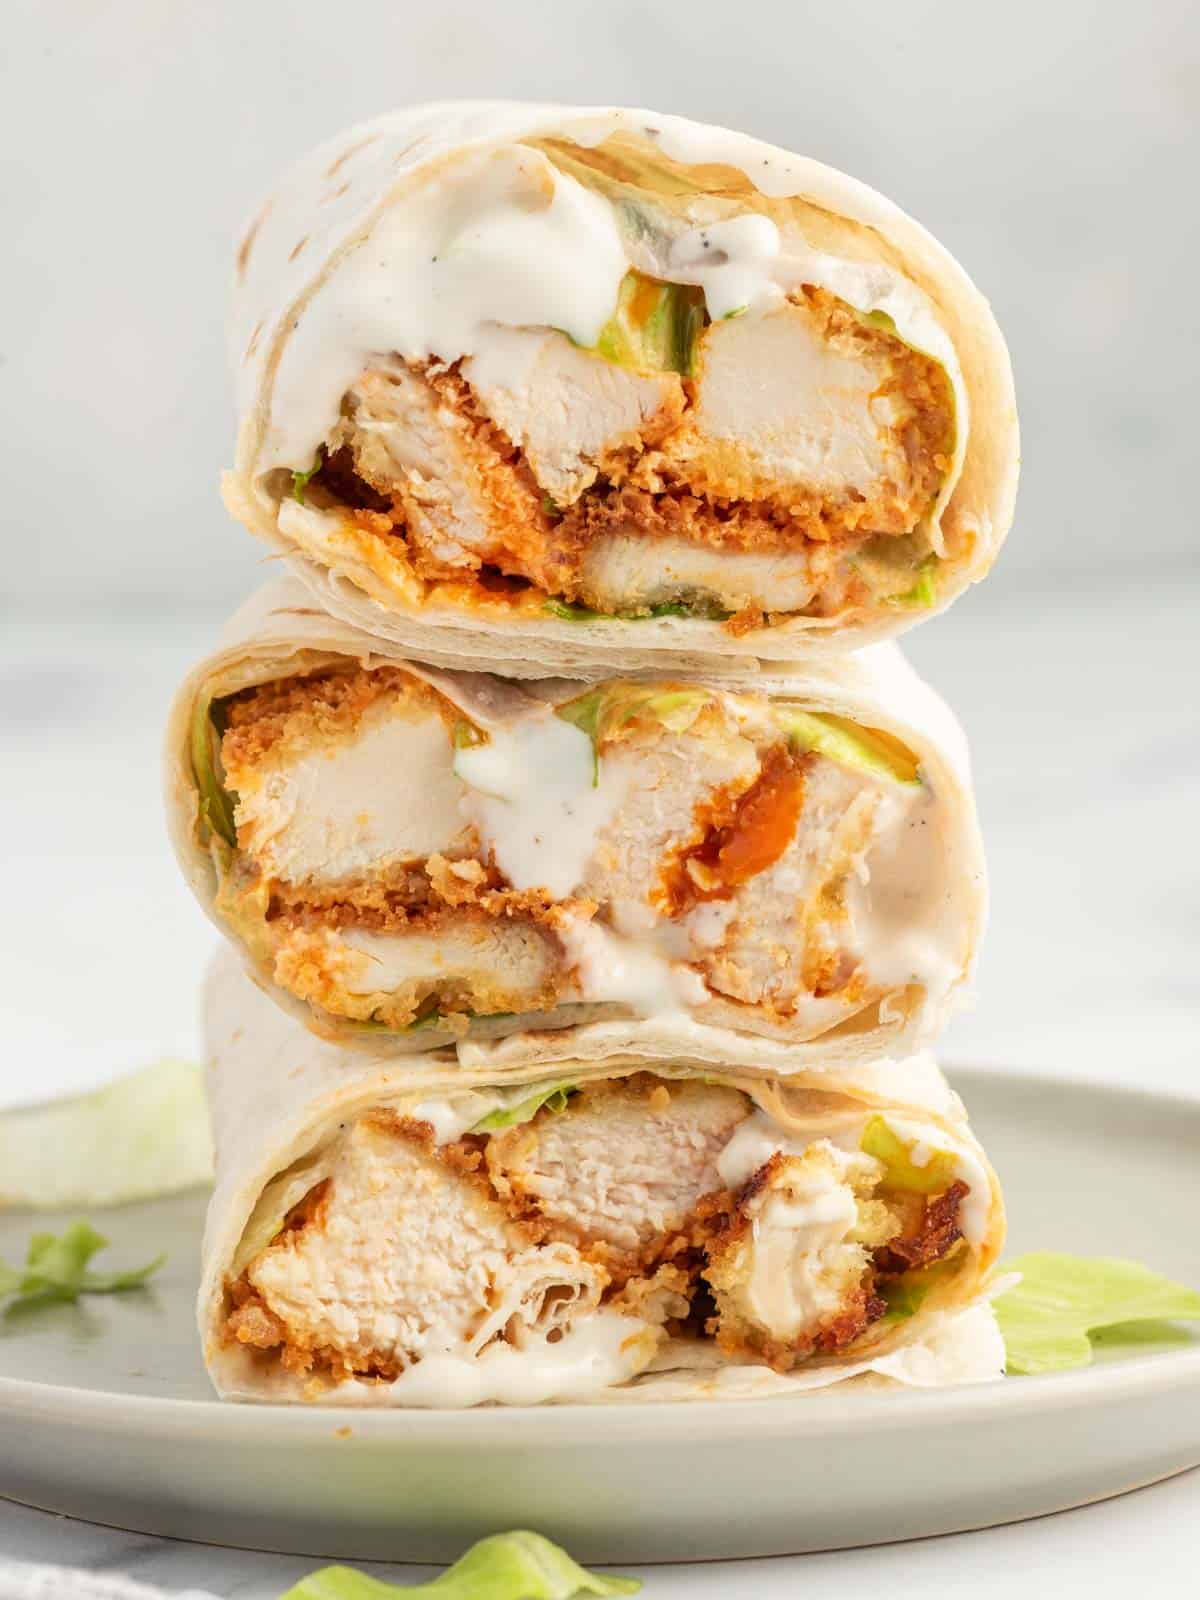 Crispy Buffalo chicken wrap sliced into pieces and stacked on a plate.